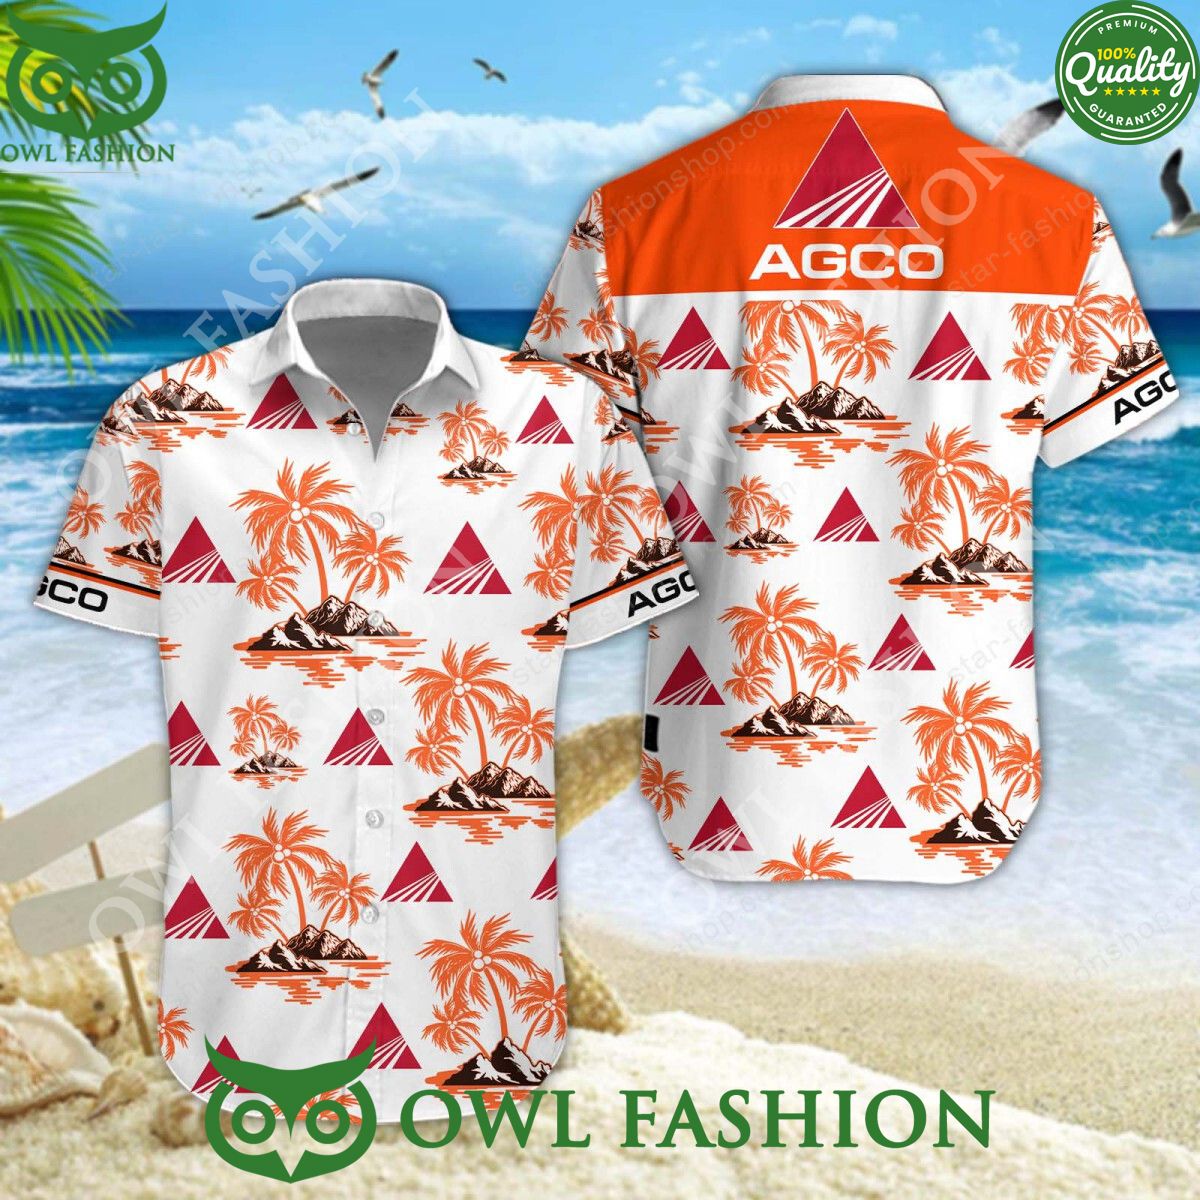 AGCO Allis American agricultural machinery manufacturer hawaiian shirt and short